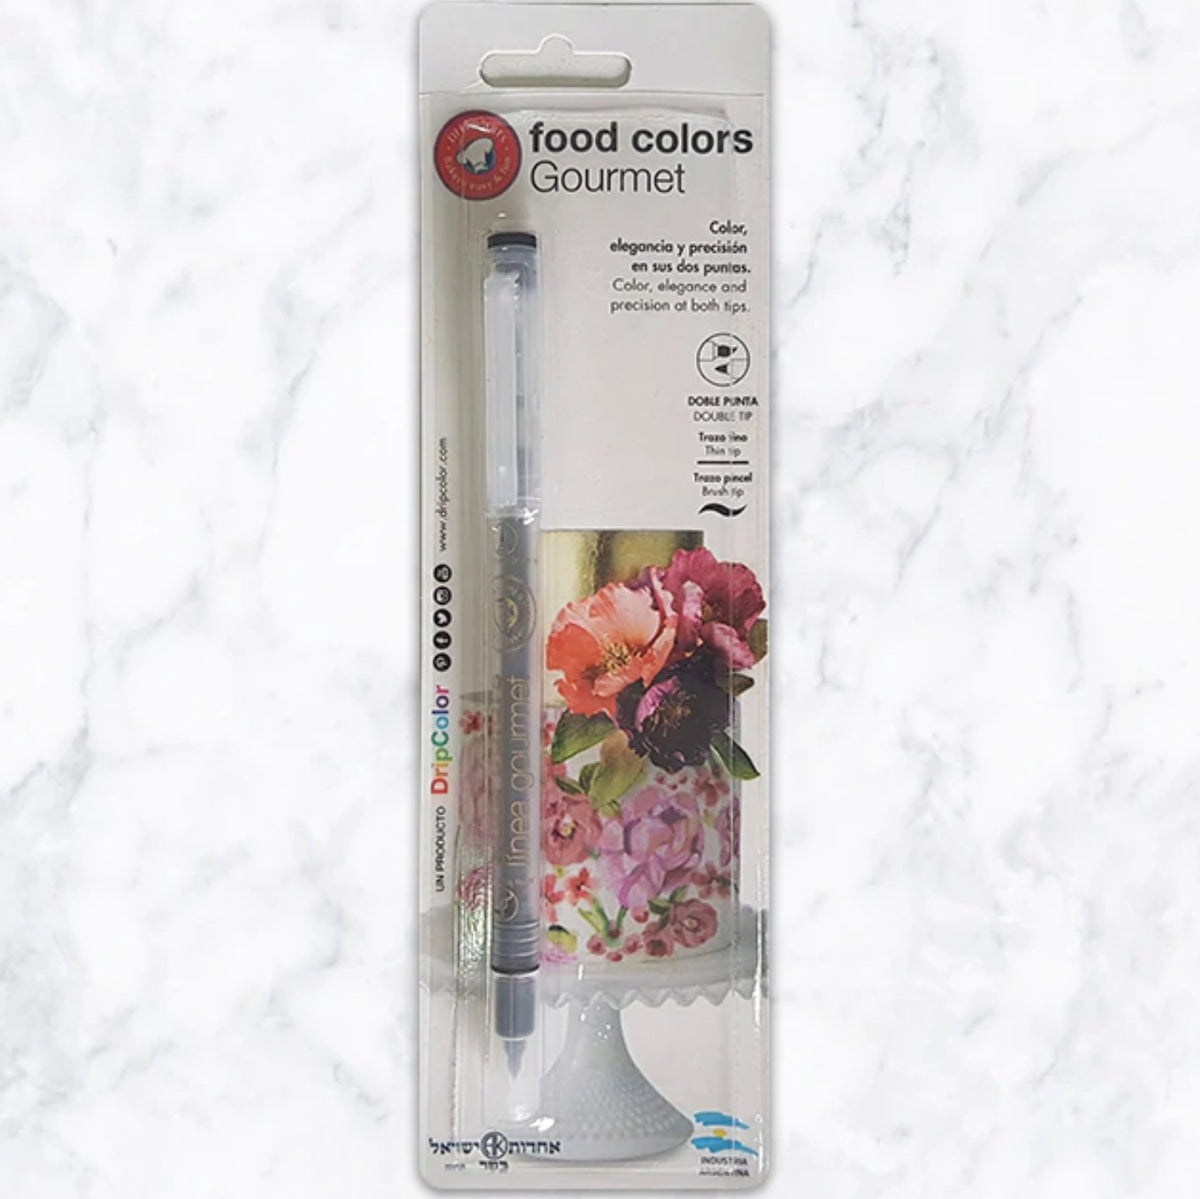 https://www.artisincakes.shop/wp-content/uploads/1689/10/enjoy-a-big-discount-when-you-purchase-art-pen-dripcolor-double-sided-black-pen-fine-point-marker-on-one-side-and-fine-line-brush-on-the-other-side-dripcolor_1.jpg